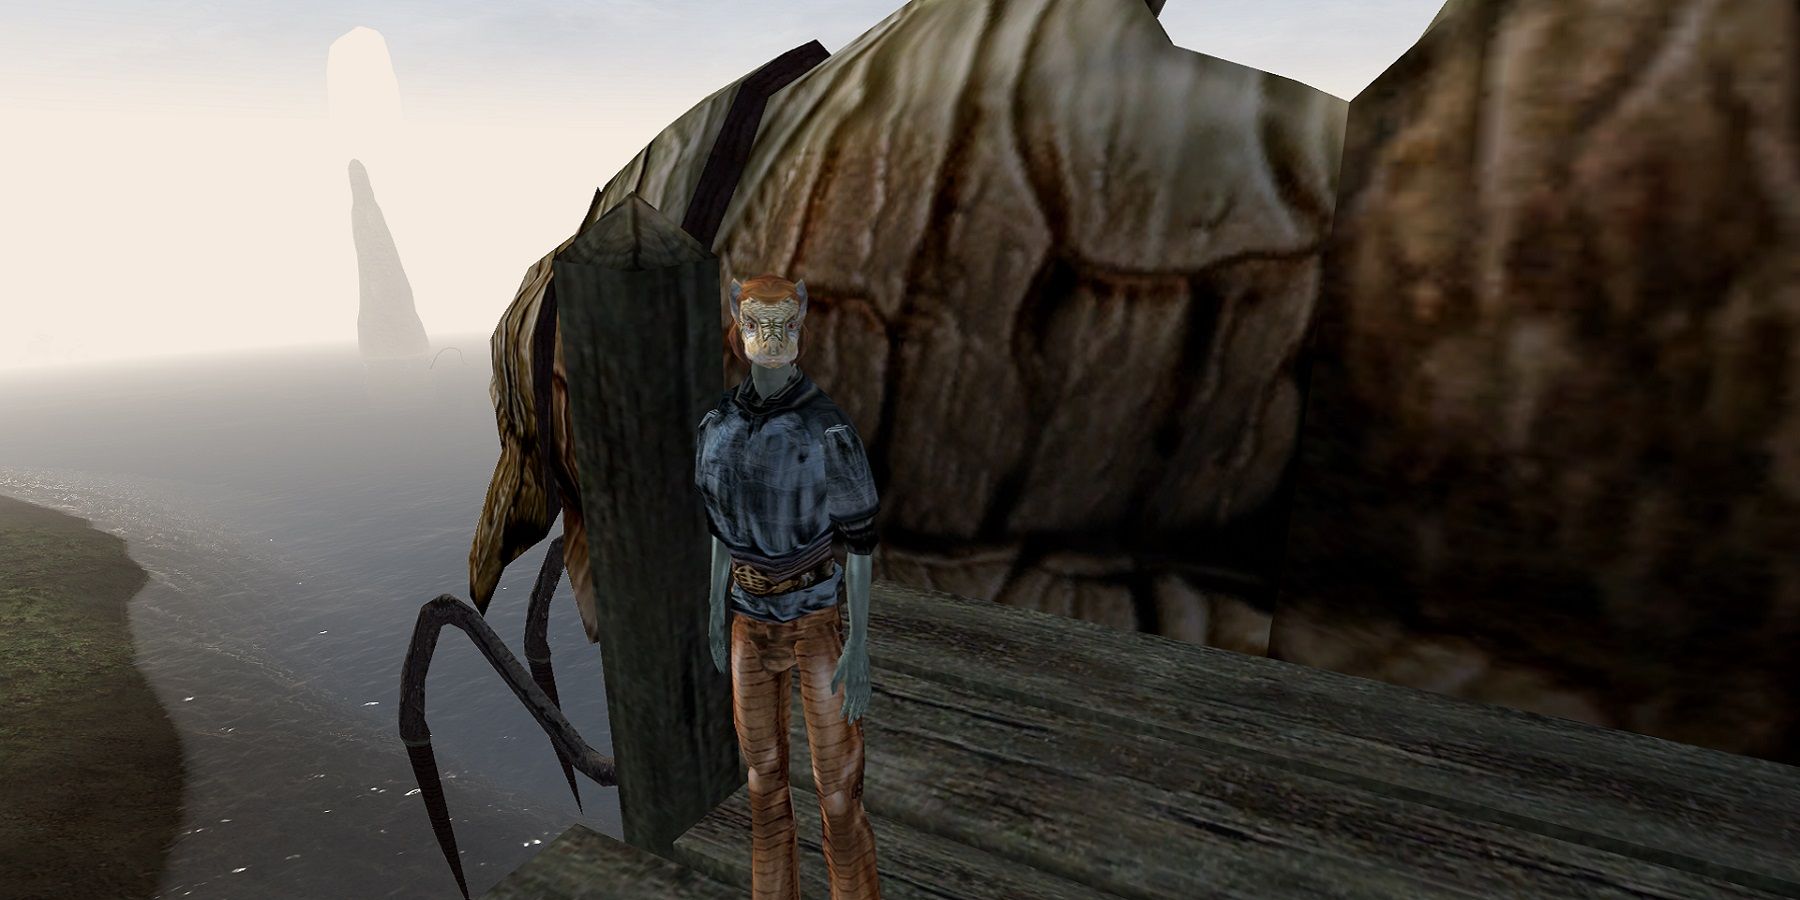 Image from a Morrowind mod showing an Argonian stood in front of a Silt Strider.